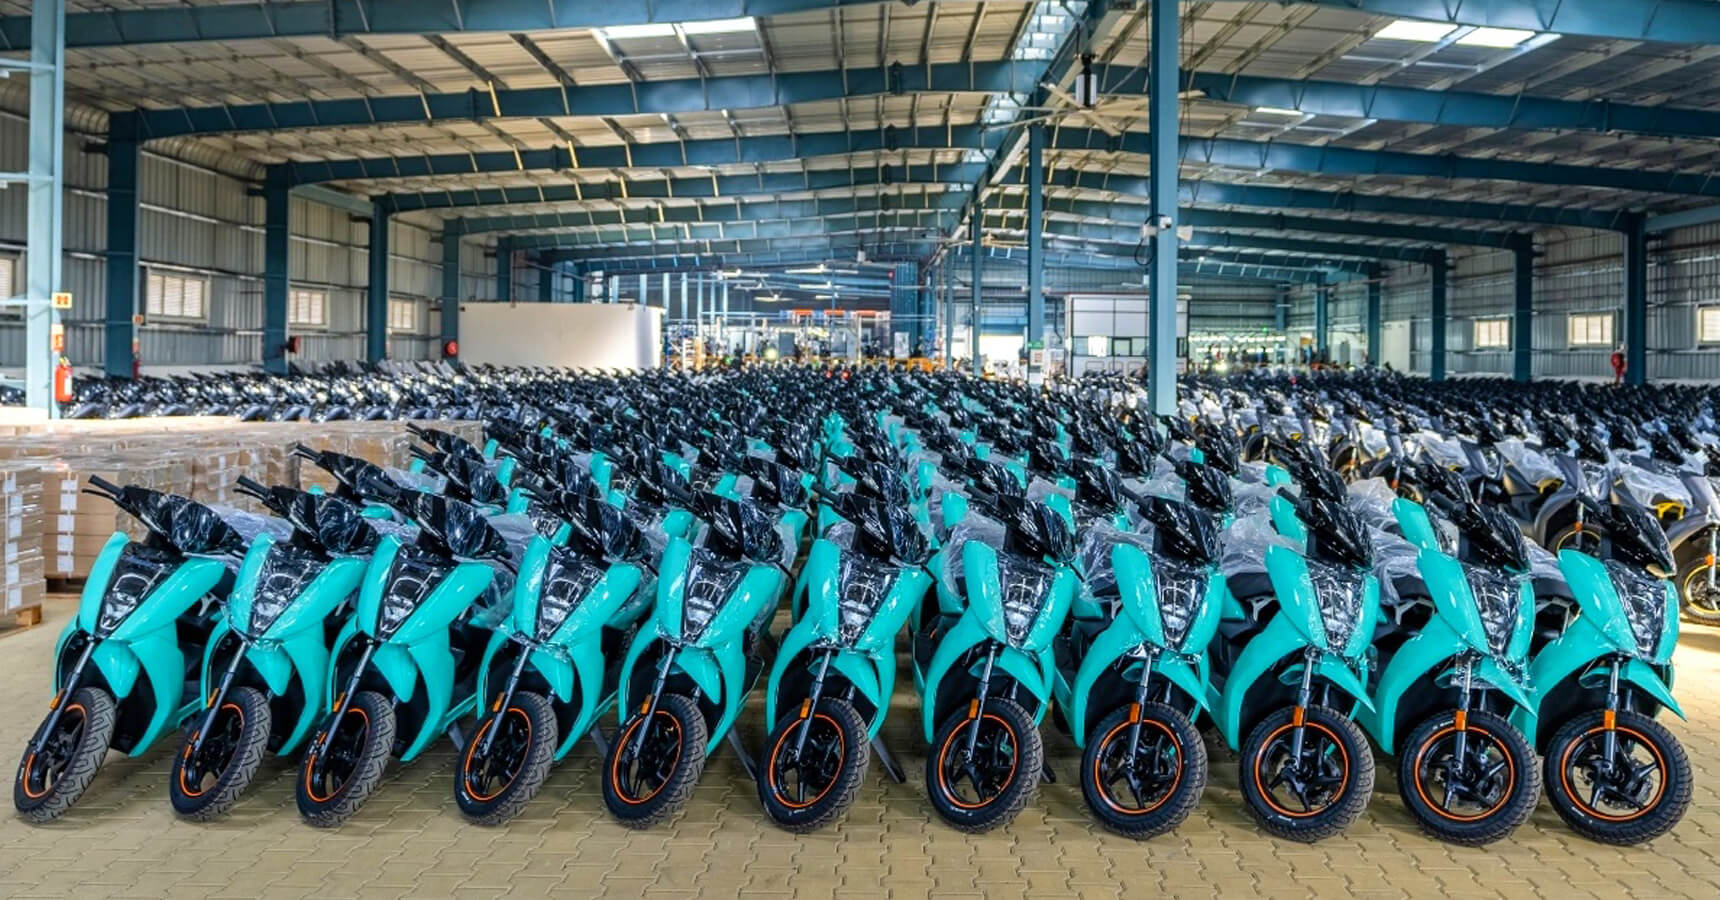 Ather Energy Achieves 1 Lakh E-Scooter Production